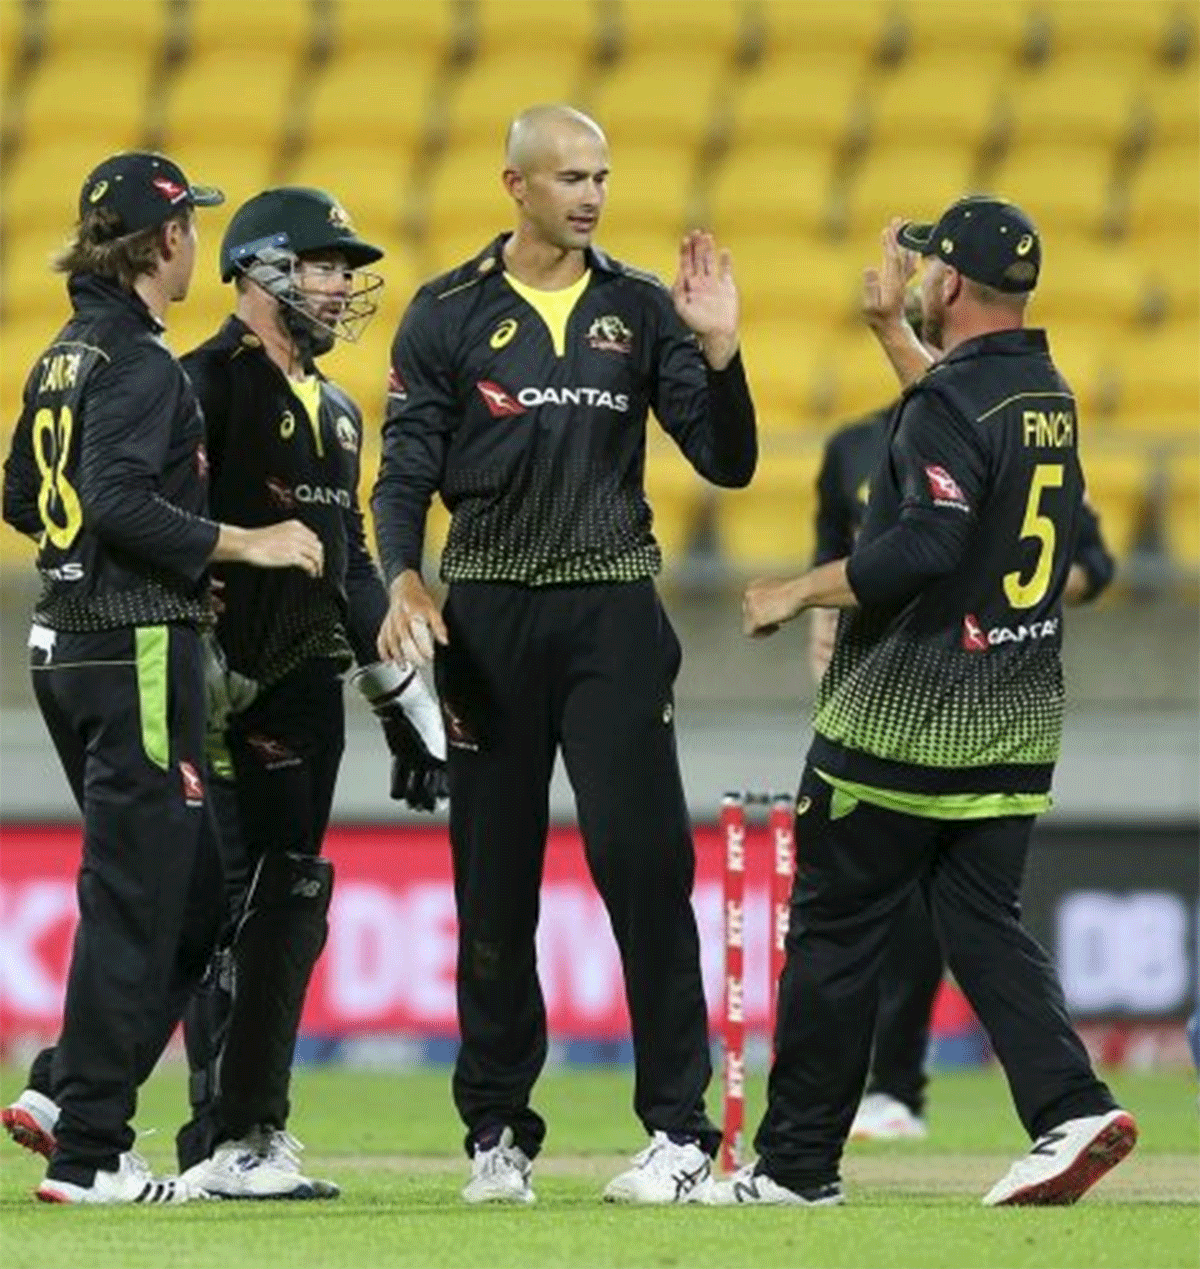 Australia have included spinners Ashton Agar and Adam Zampa in the squad  